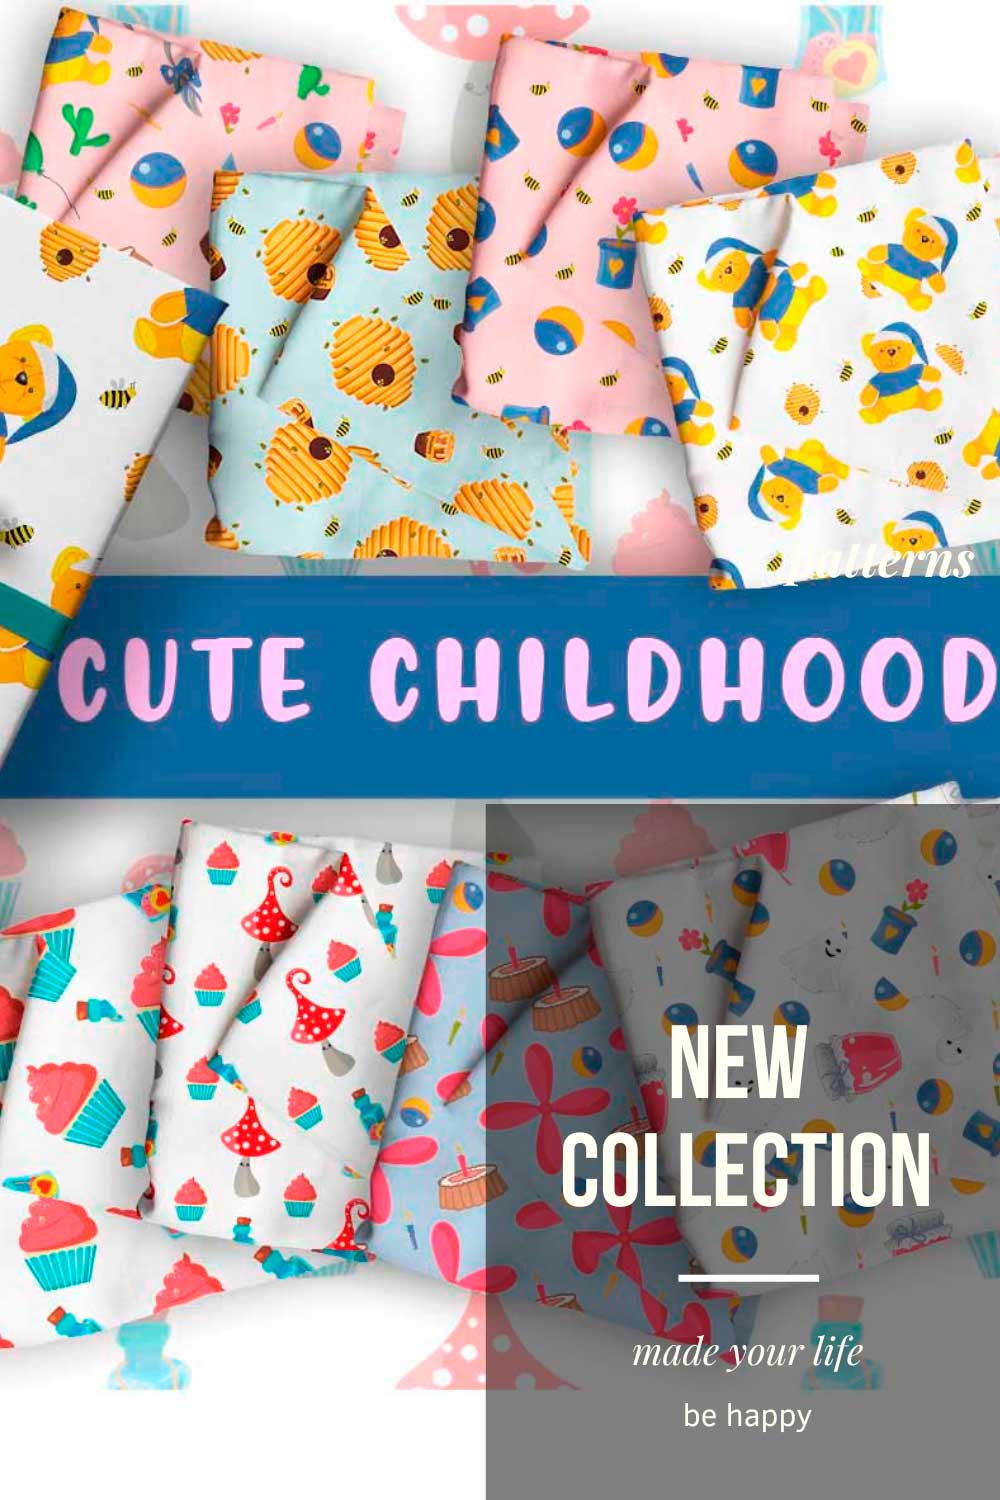 Pack of images of colorful childrens patterns.